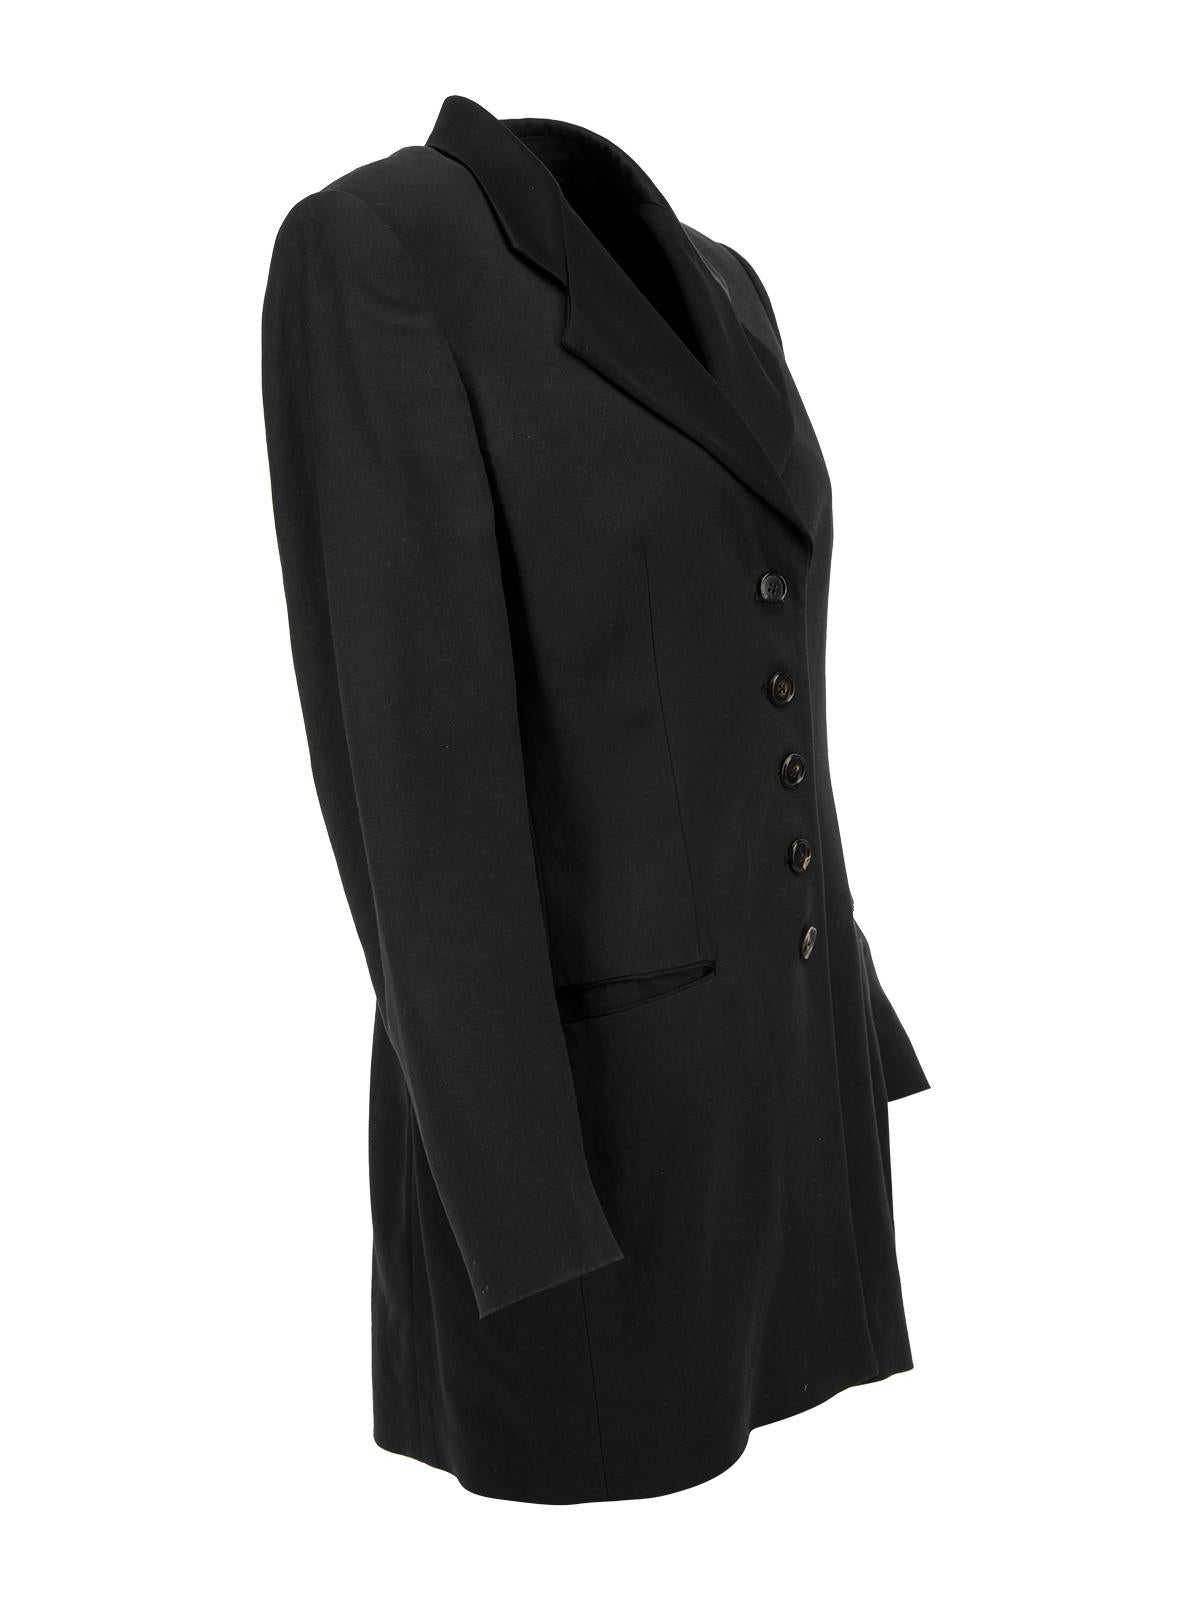 CONDITION is Very good. Minimal wear to blazer is evident. Minimal wear to outer fabric on this used Narciso Rodriguez designer resale item. Details Black Synthetic Blazer Long length Long sleeves Single breasted Collared Shoulder padded 2x Front